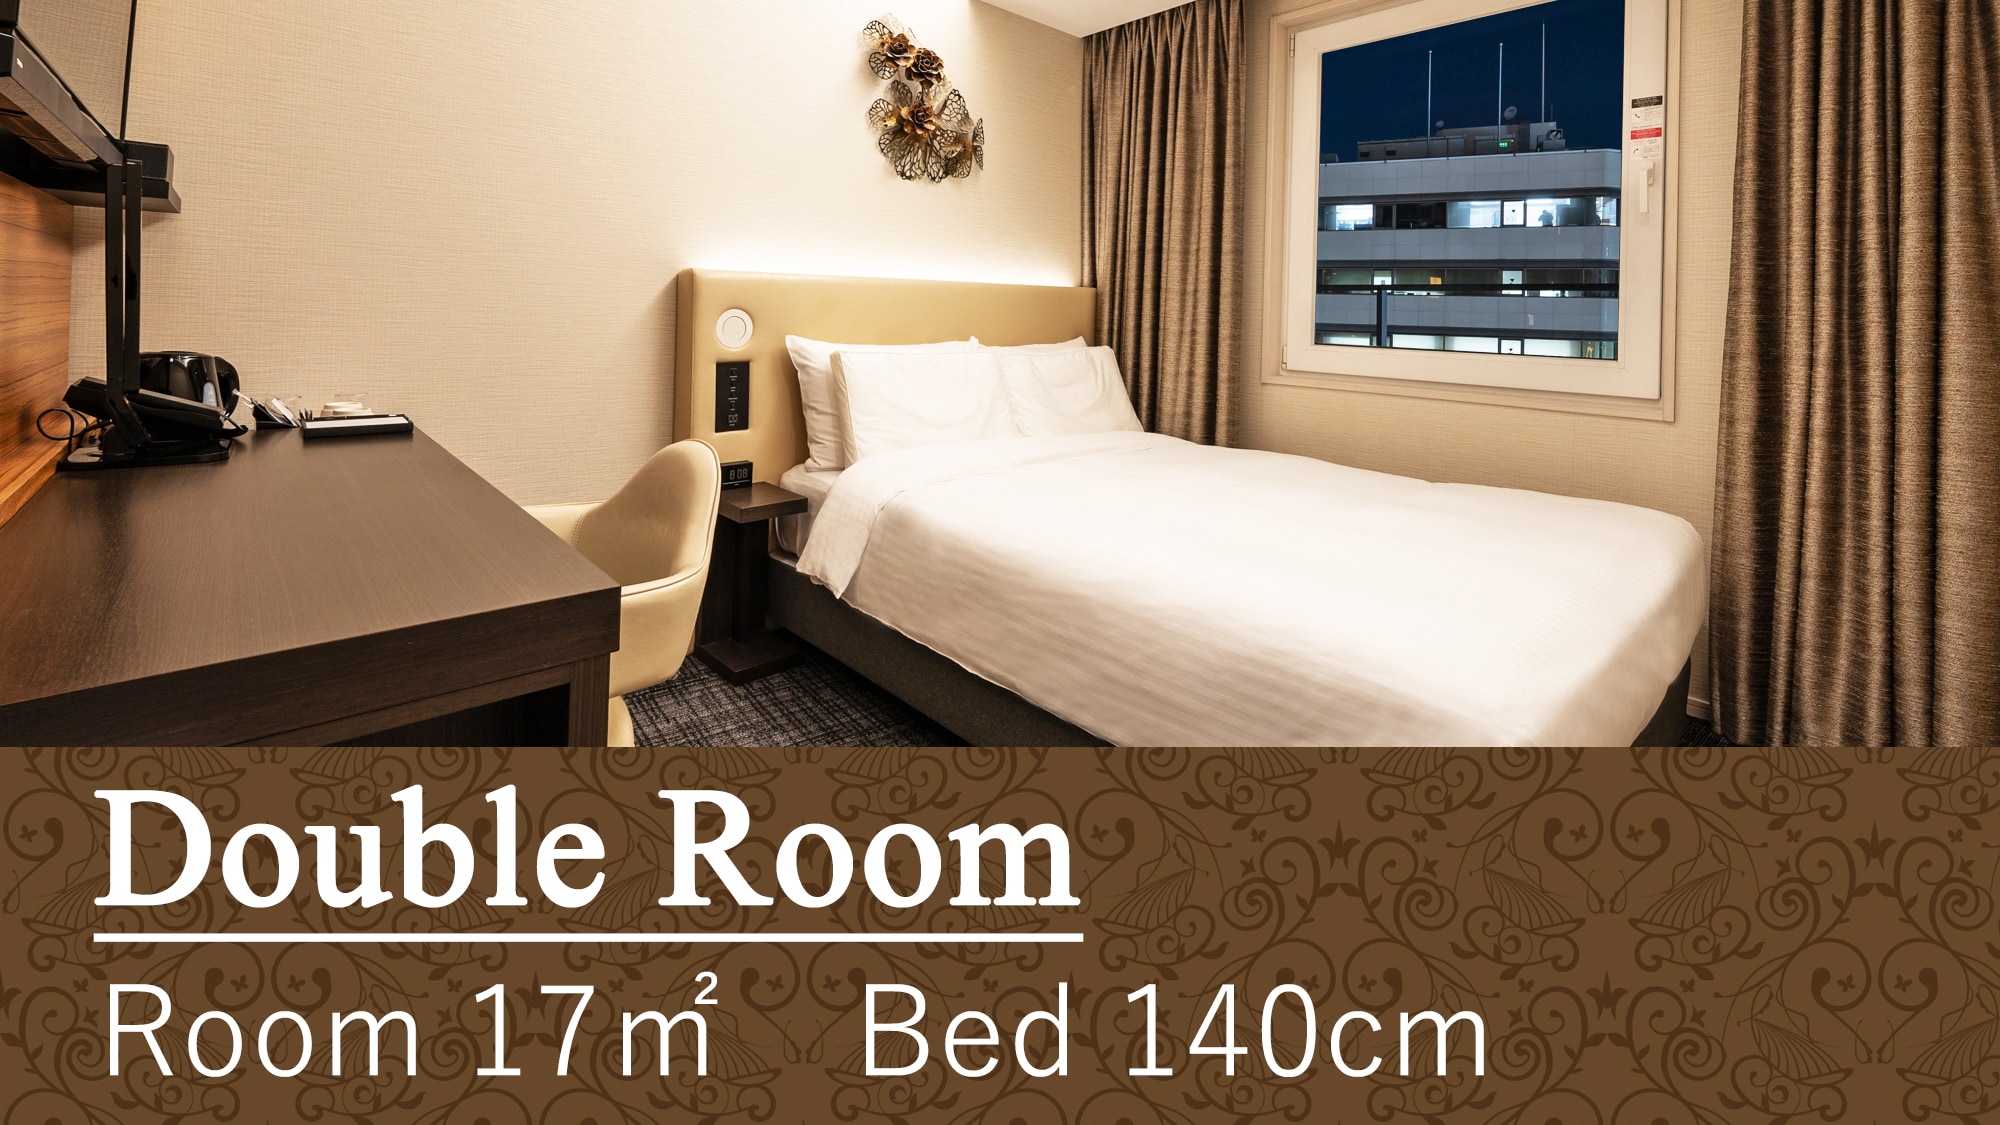 Double [16-17 square meters/1 bed width 140 cm x 1 bed/1-2 people]